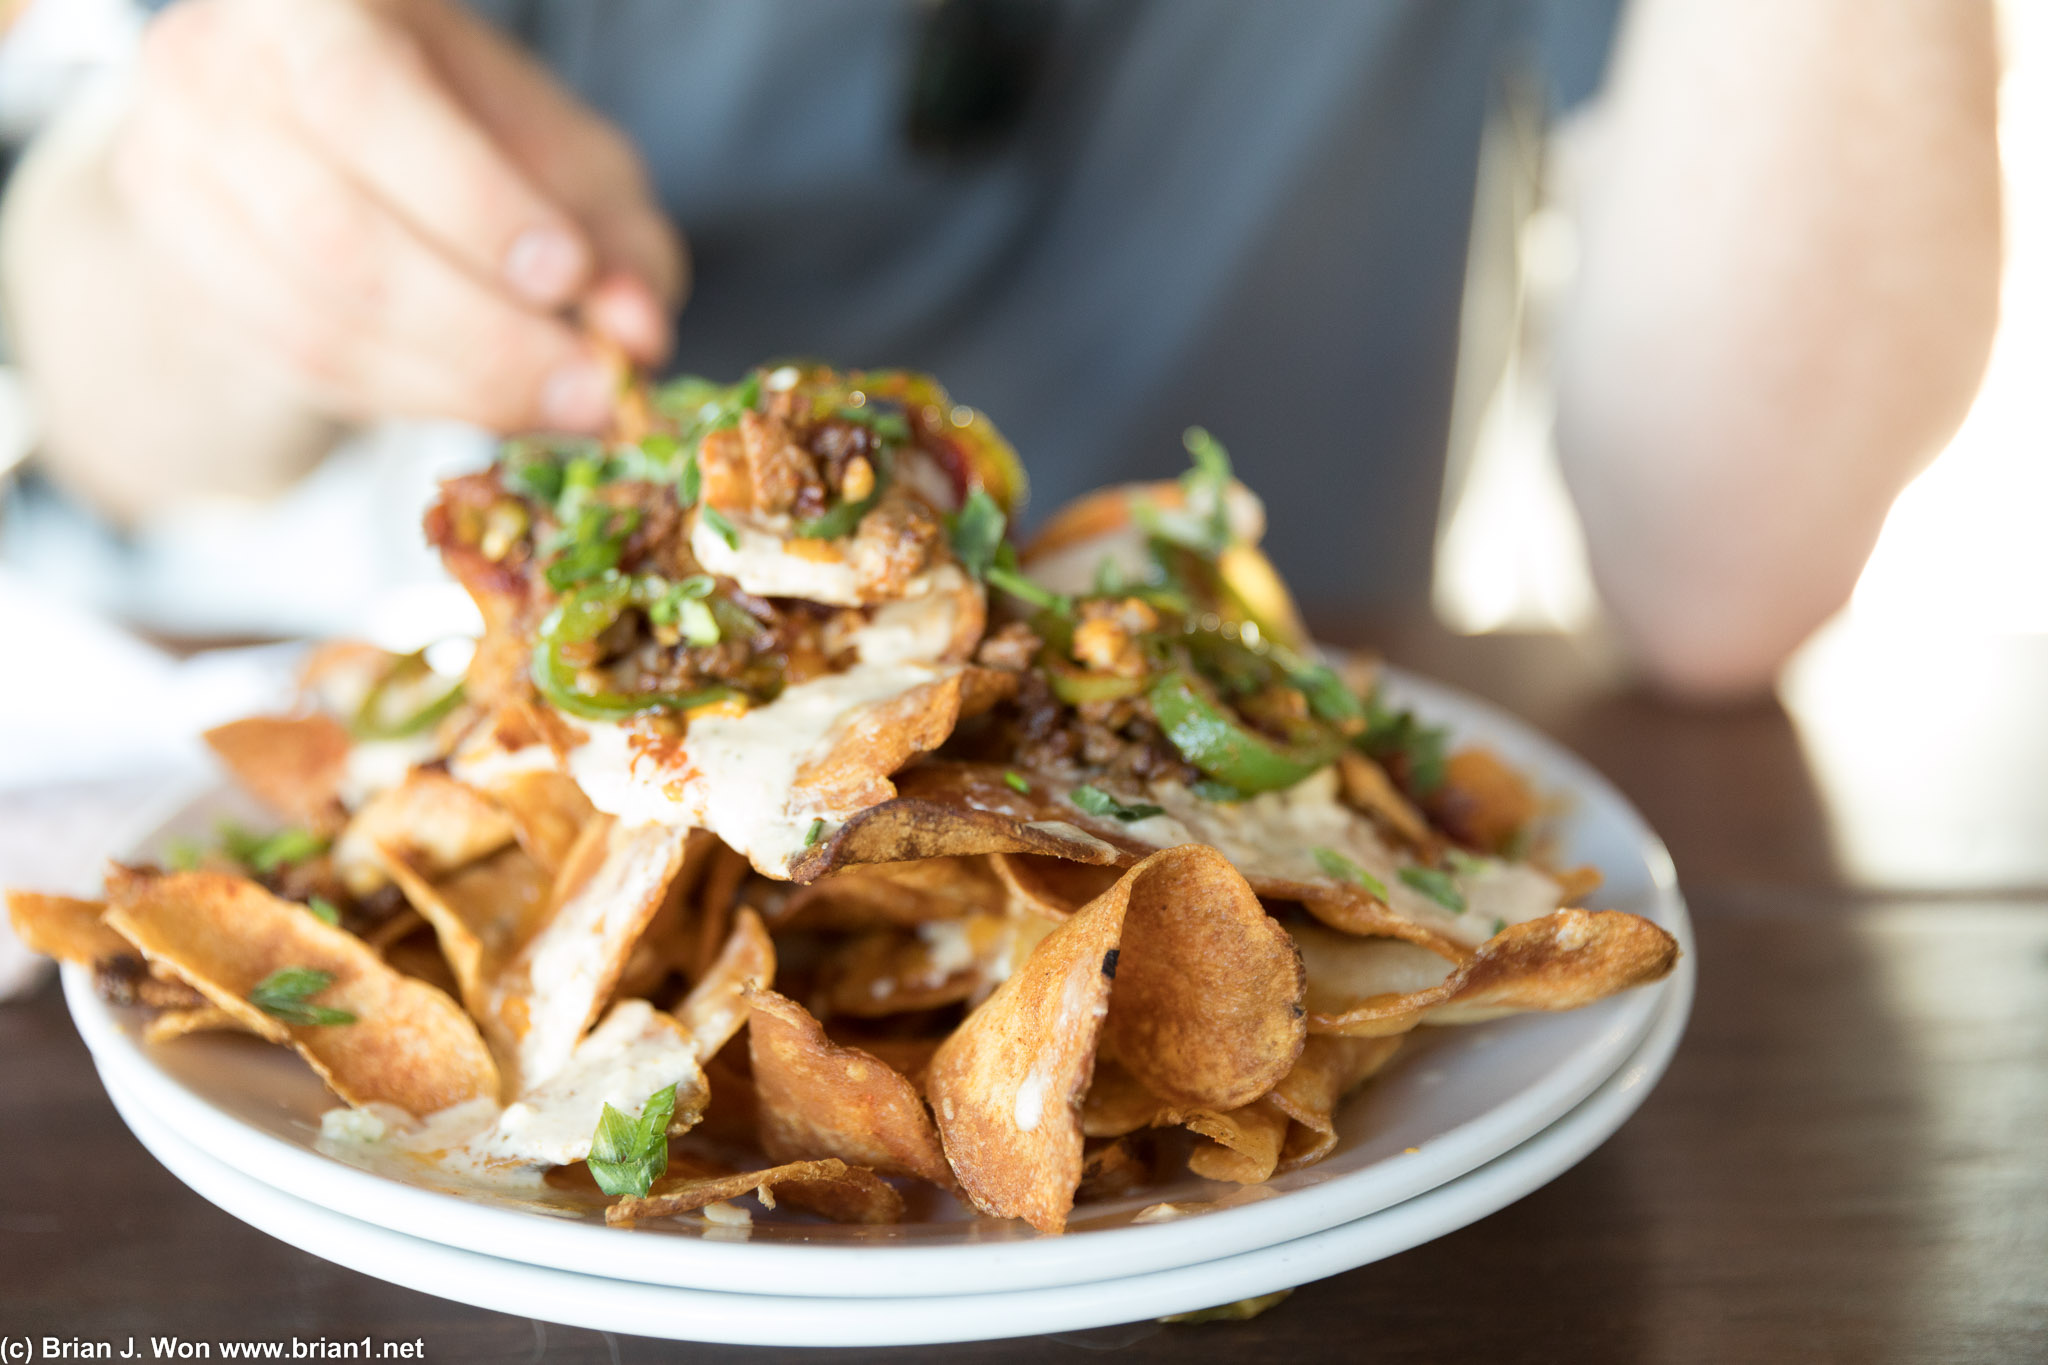 Nachos use regular potato chips? (and how big is that pile?!)